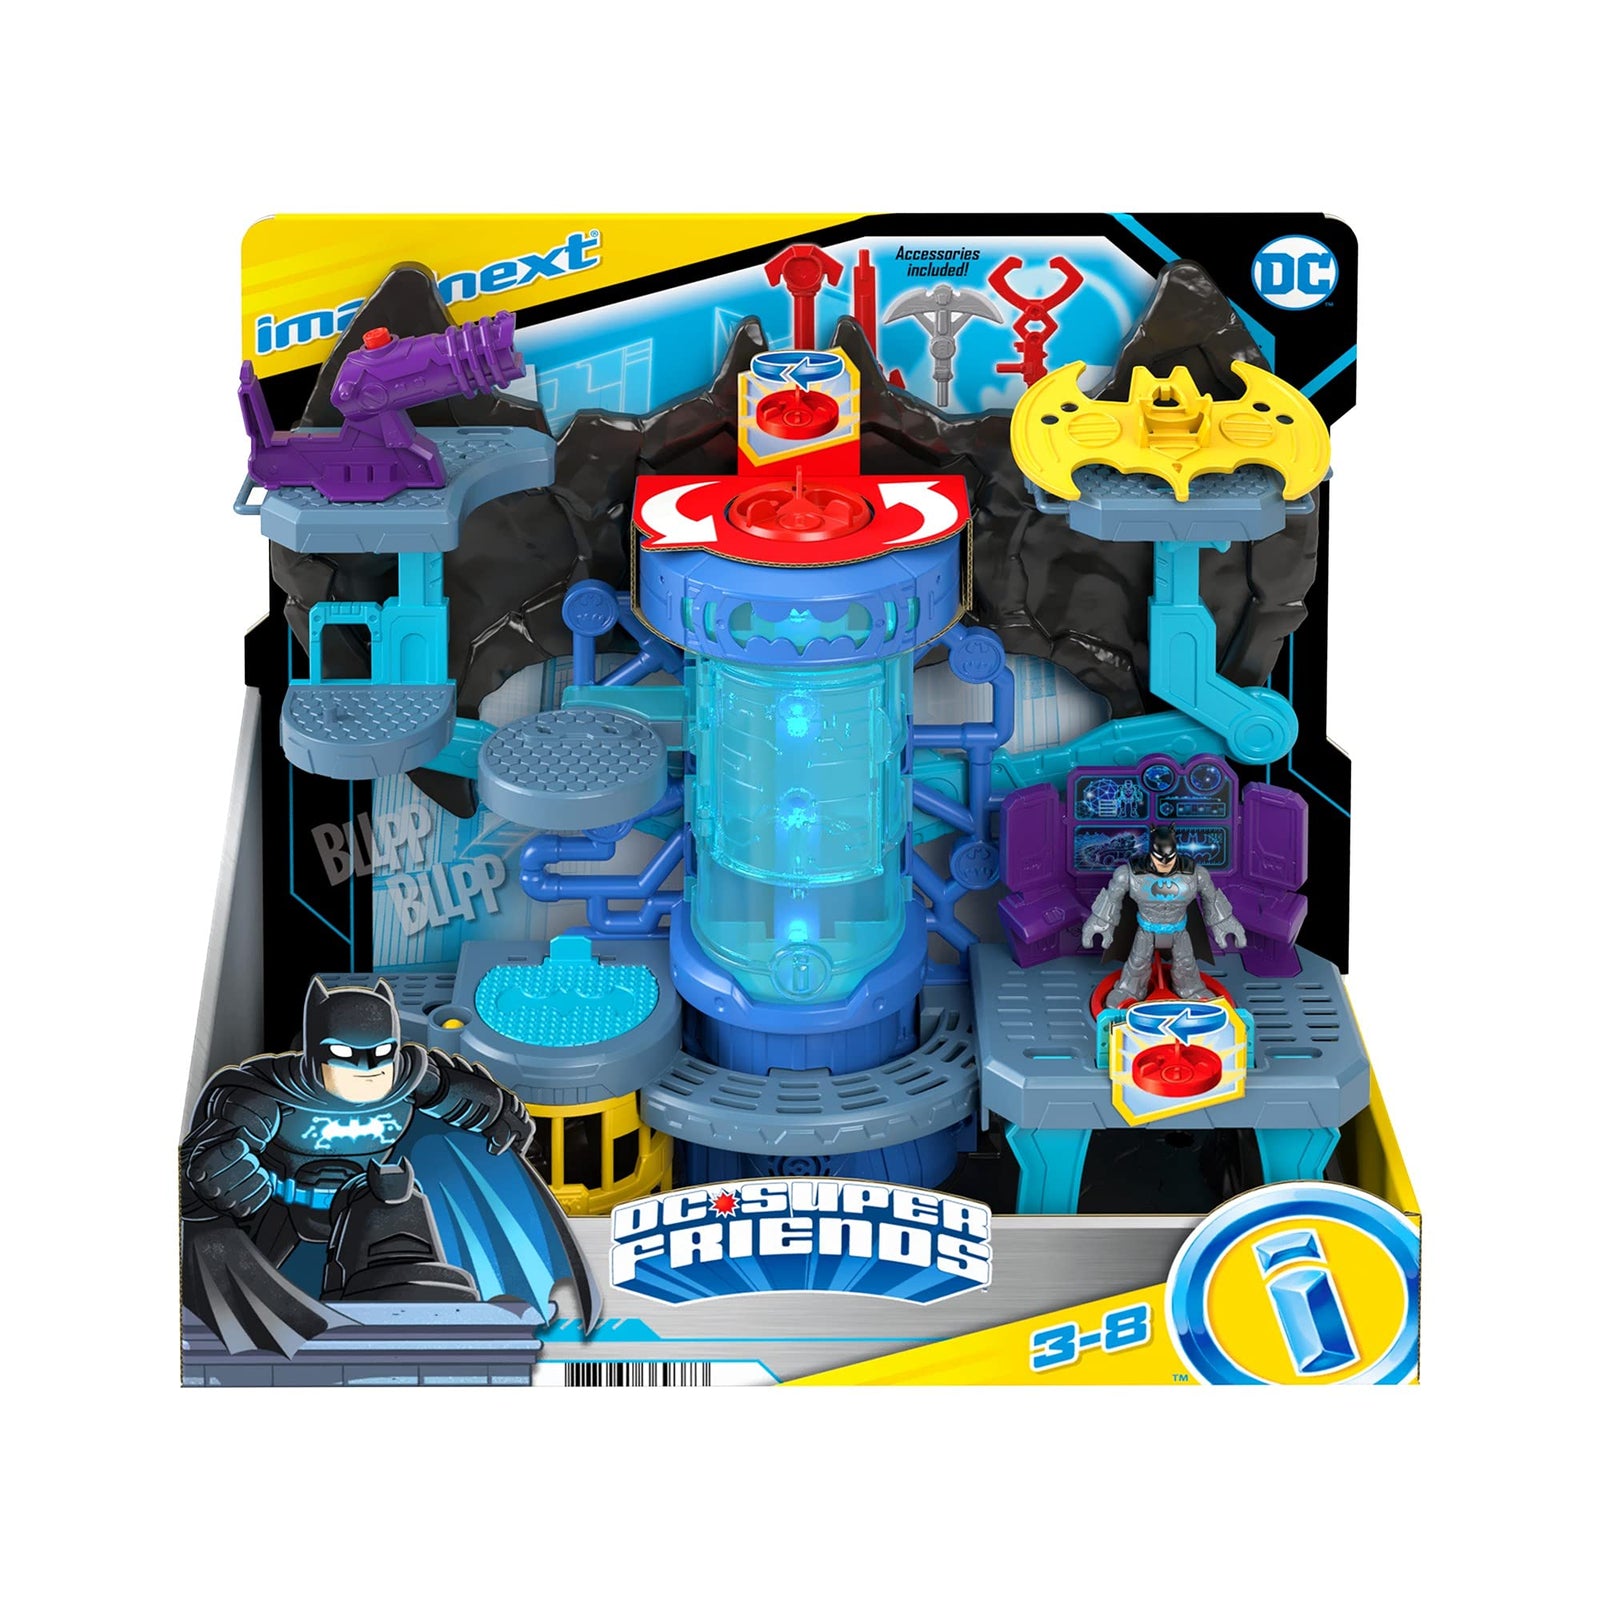 Fisher-Price Imaginext DC Super Friends Bat-Tech Batcave, Batman playset with lights and sounds for kids ages 3 to 8 years